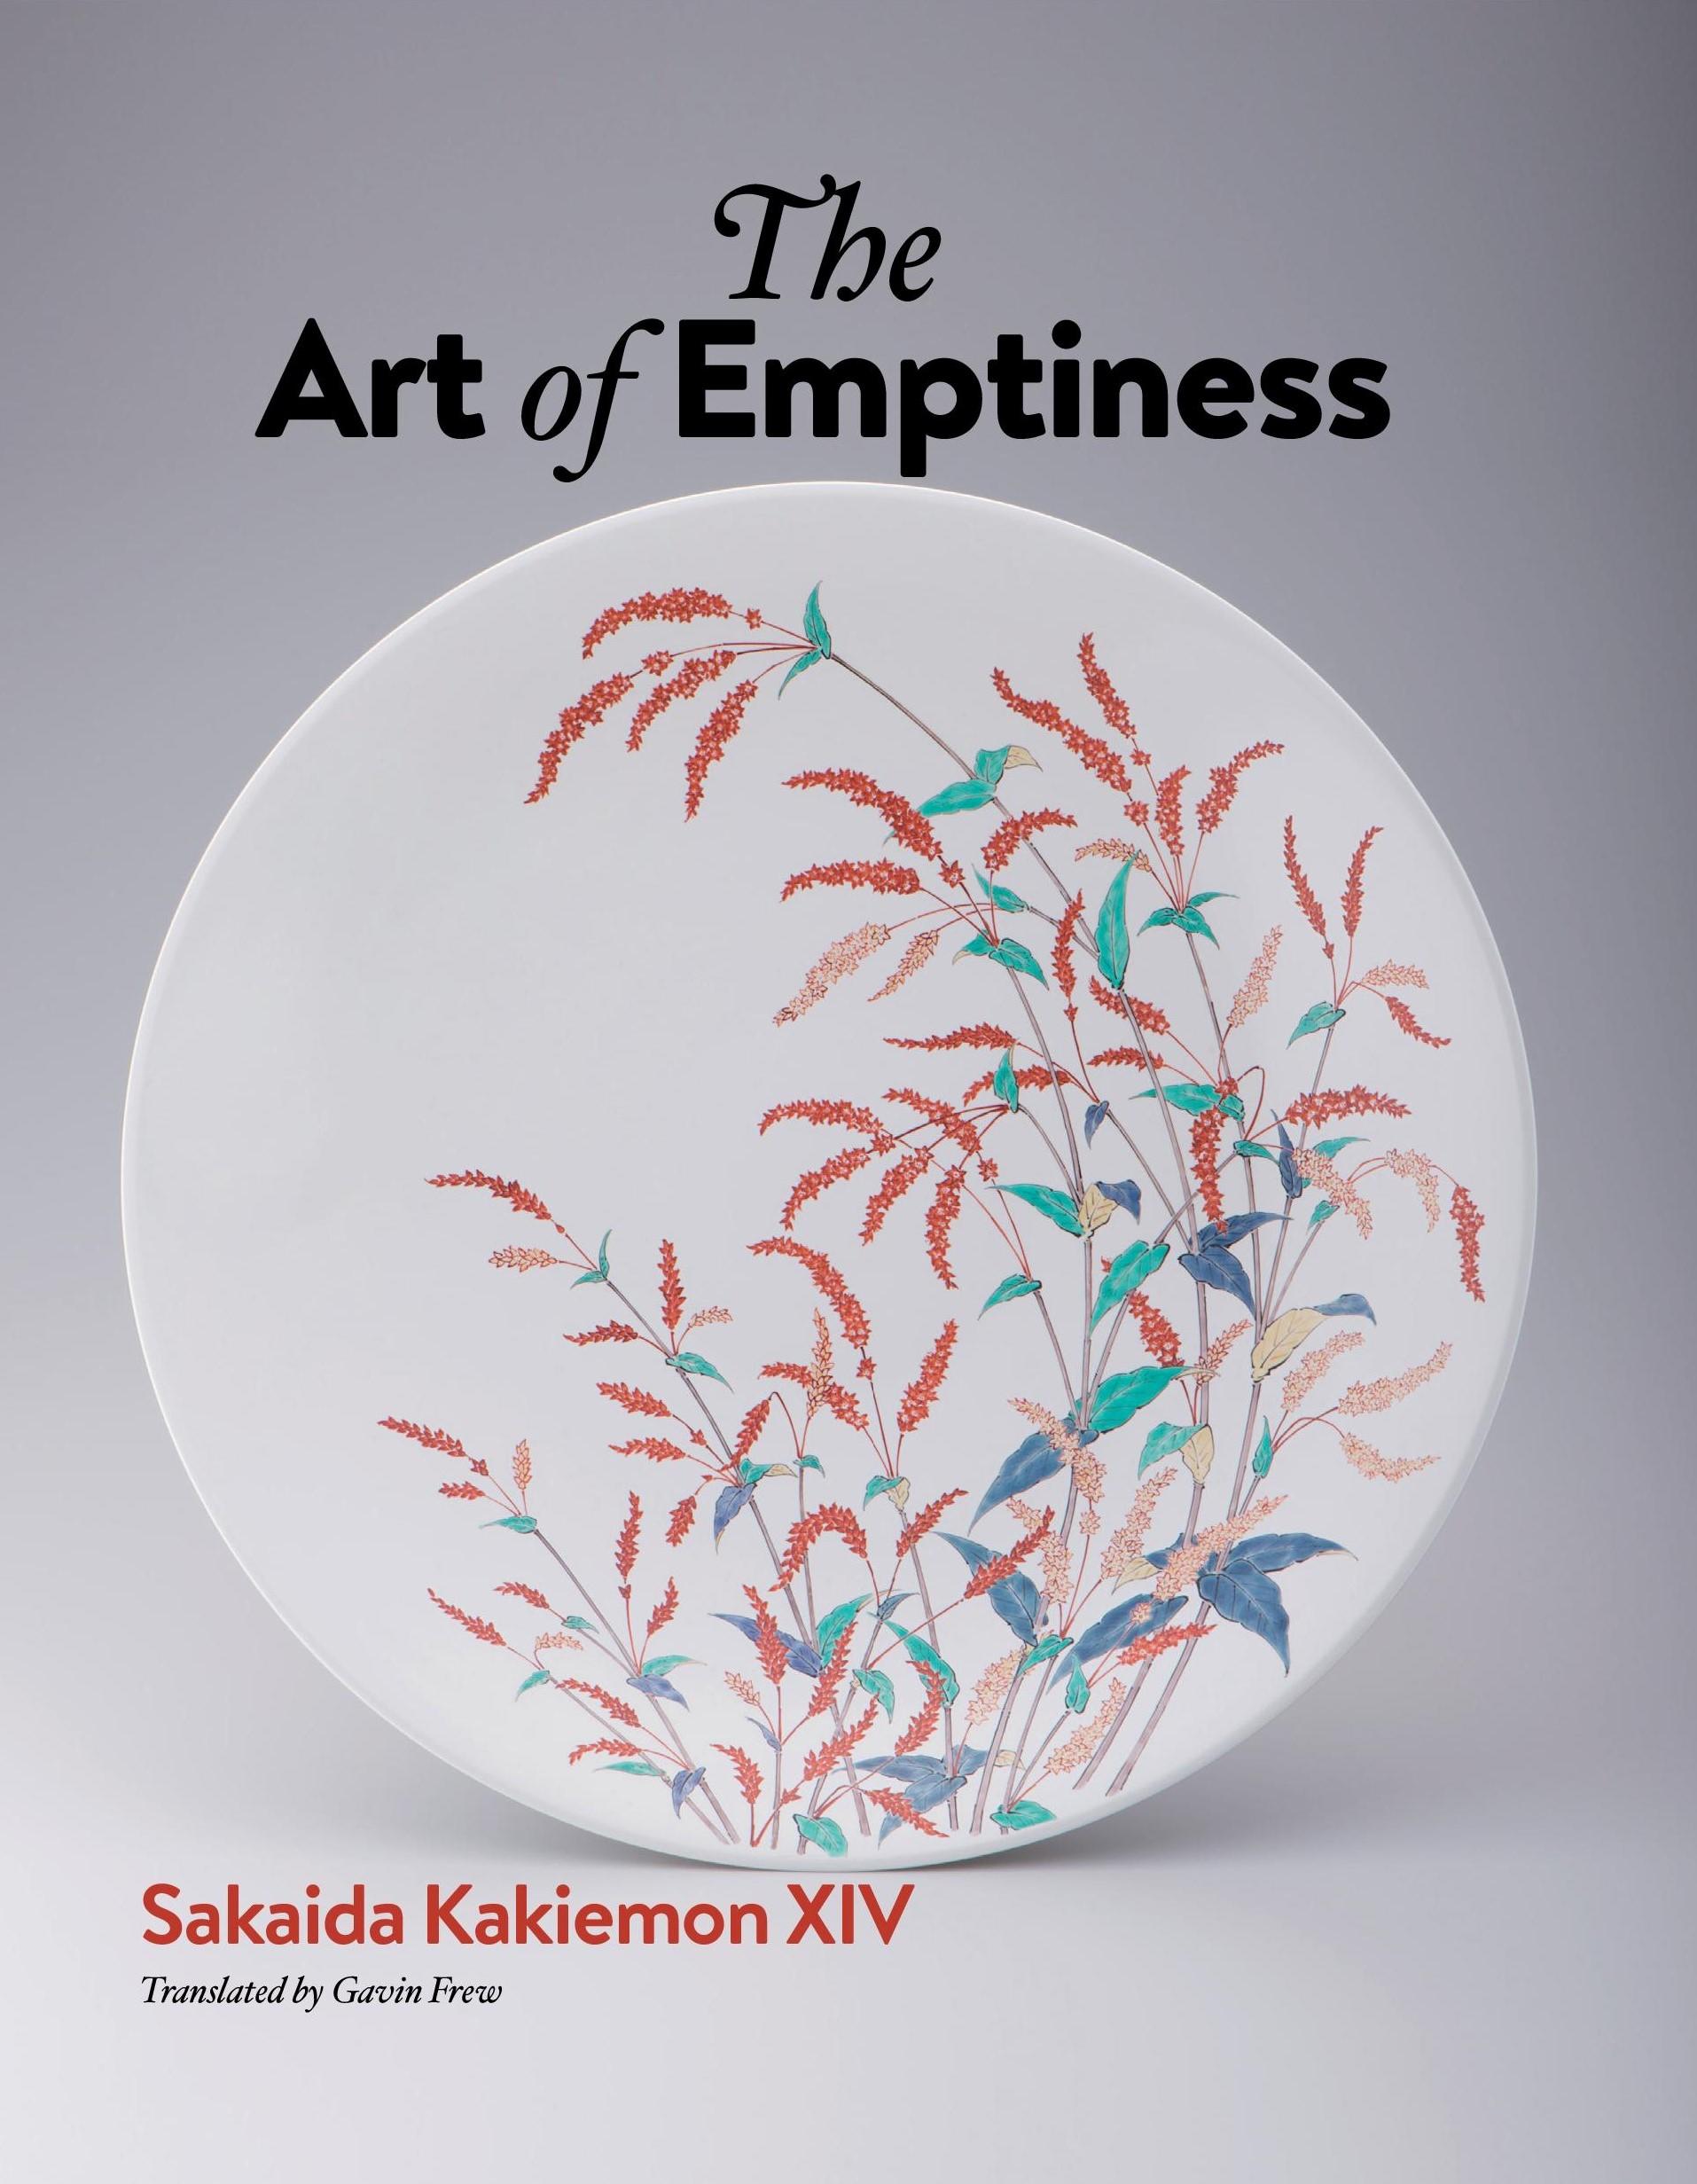 The Art of Emptiness